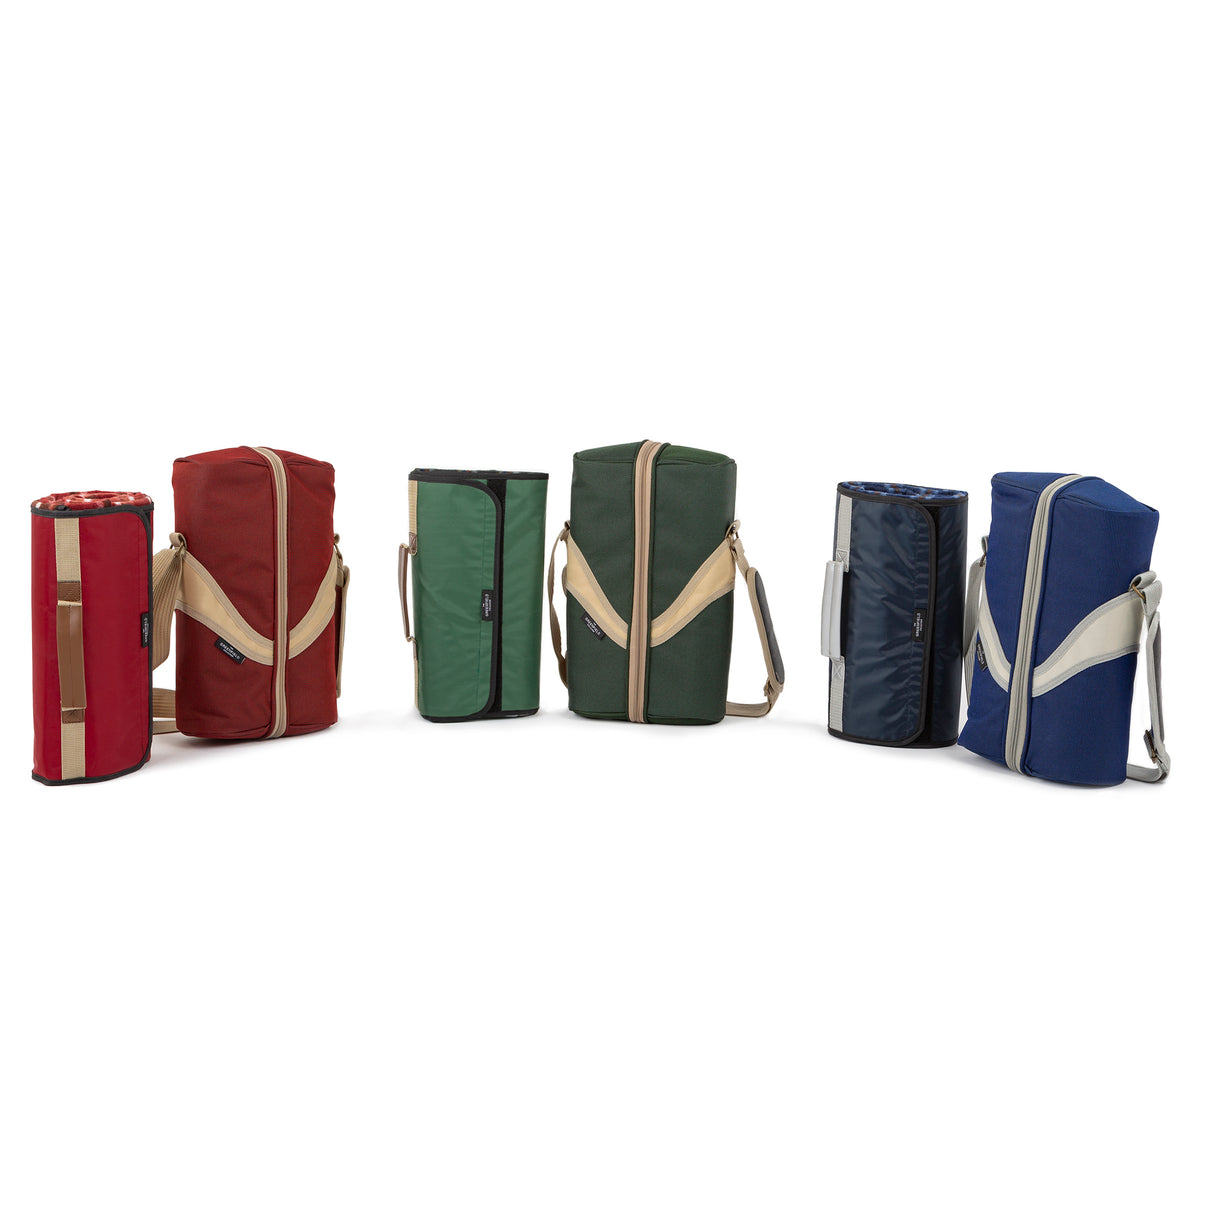 Greenfield Collection Deluxe Wine Cooler Bag for Two People with Matching Picnic Blanket - The Greenfield Collection